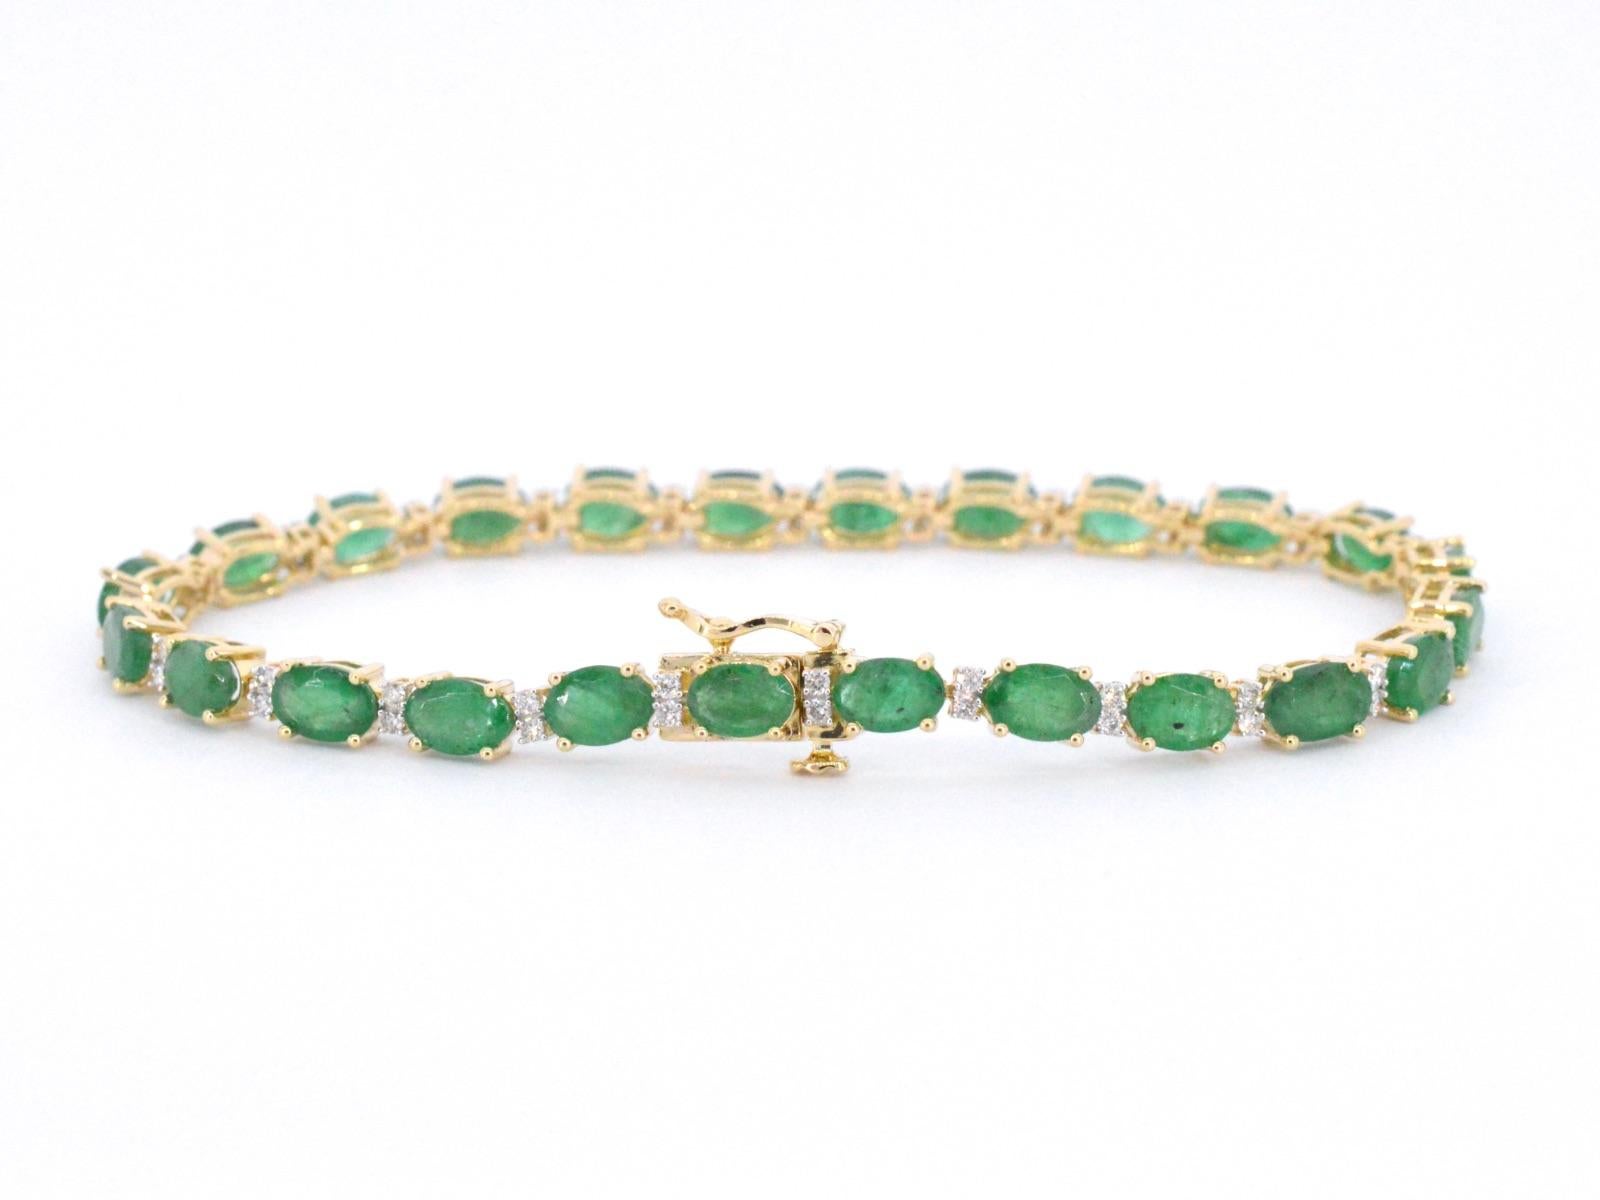 Adorn your wrist with the enchanting yellow gold tennis bracelet featuring diamonds and emerald. Crafted in lustrous yellow gold, this bracelet showcases a captivating design adorned with diamonds and a vibrant emerald gemstone. The diamonds add a